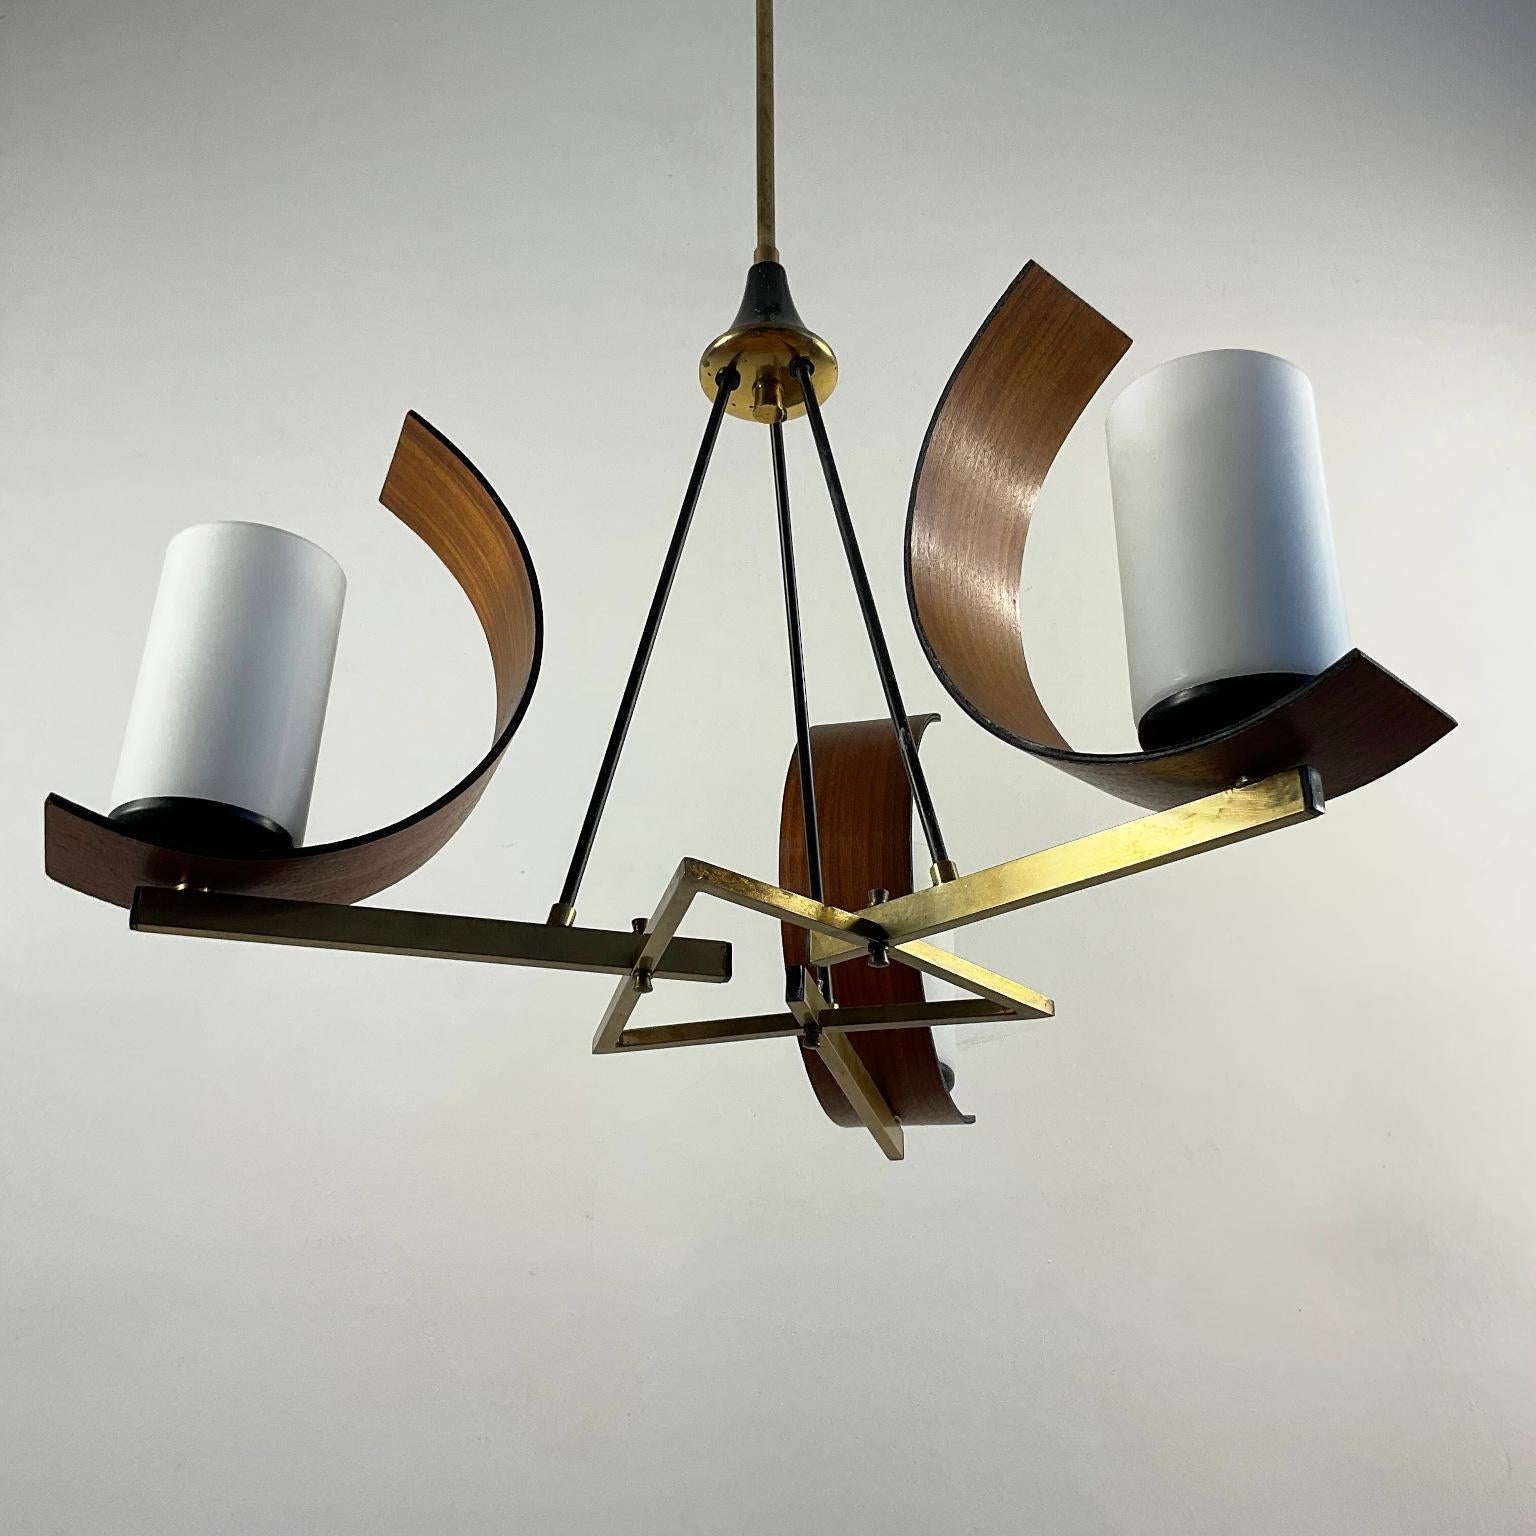 Hand-Crafted 1960s Italian Ceiling Lamp Attributed to Stilnovo with 3 Opaline lampshades